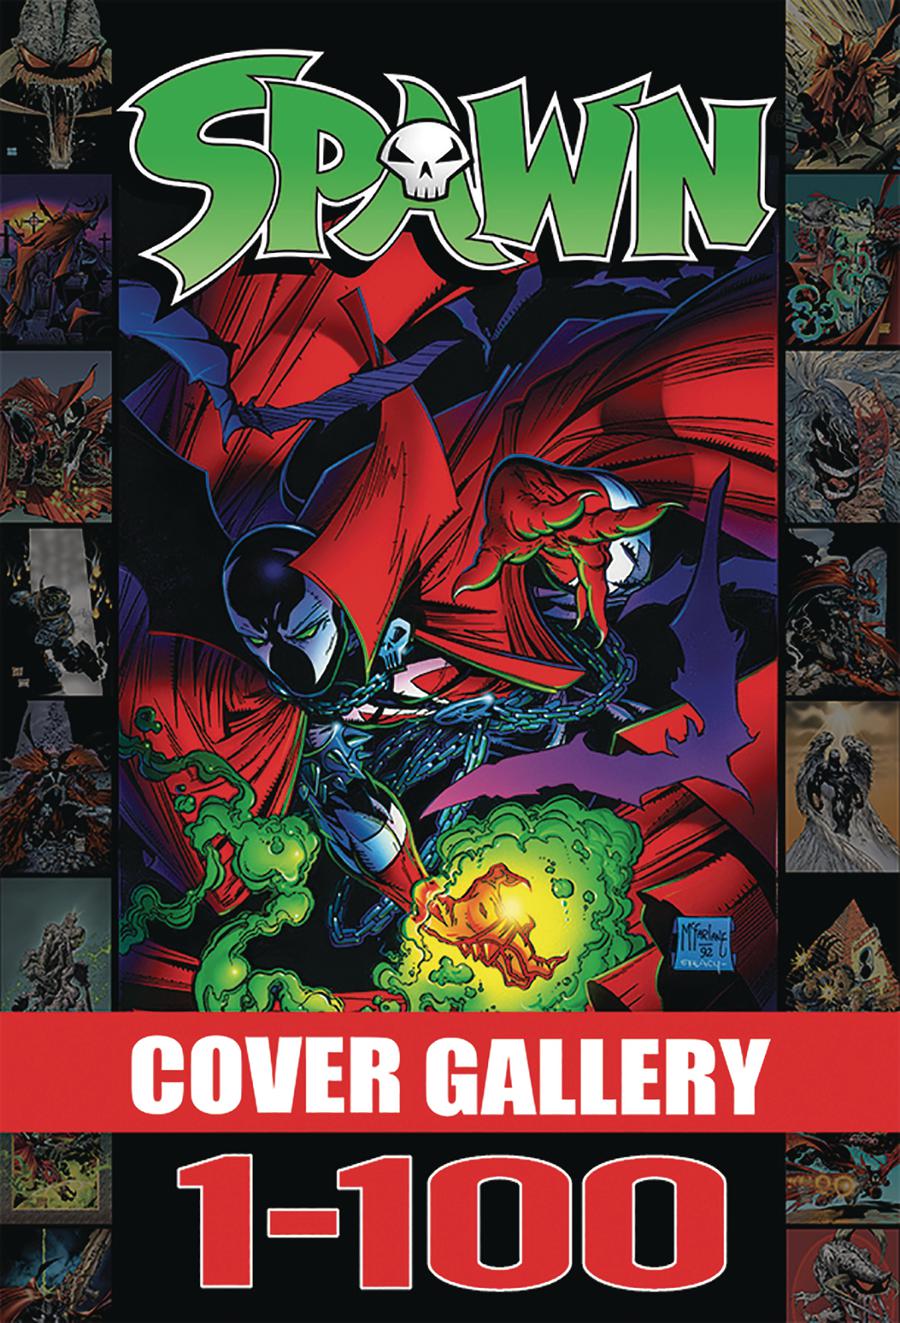 Spawn Cover Gallery Vol 1 1-100 HC